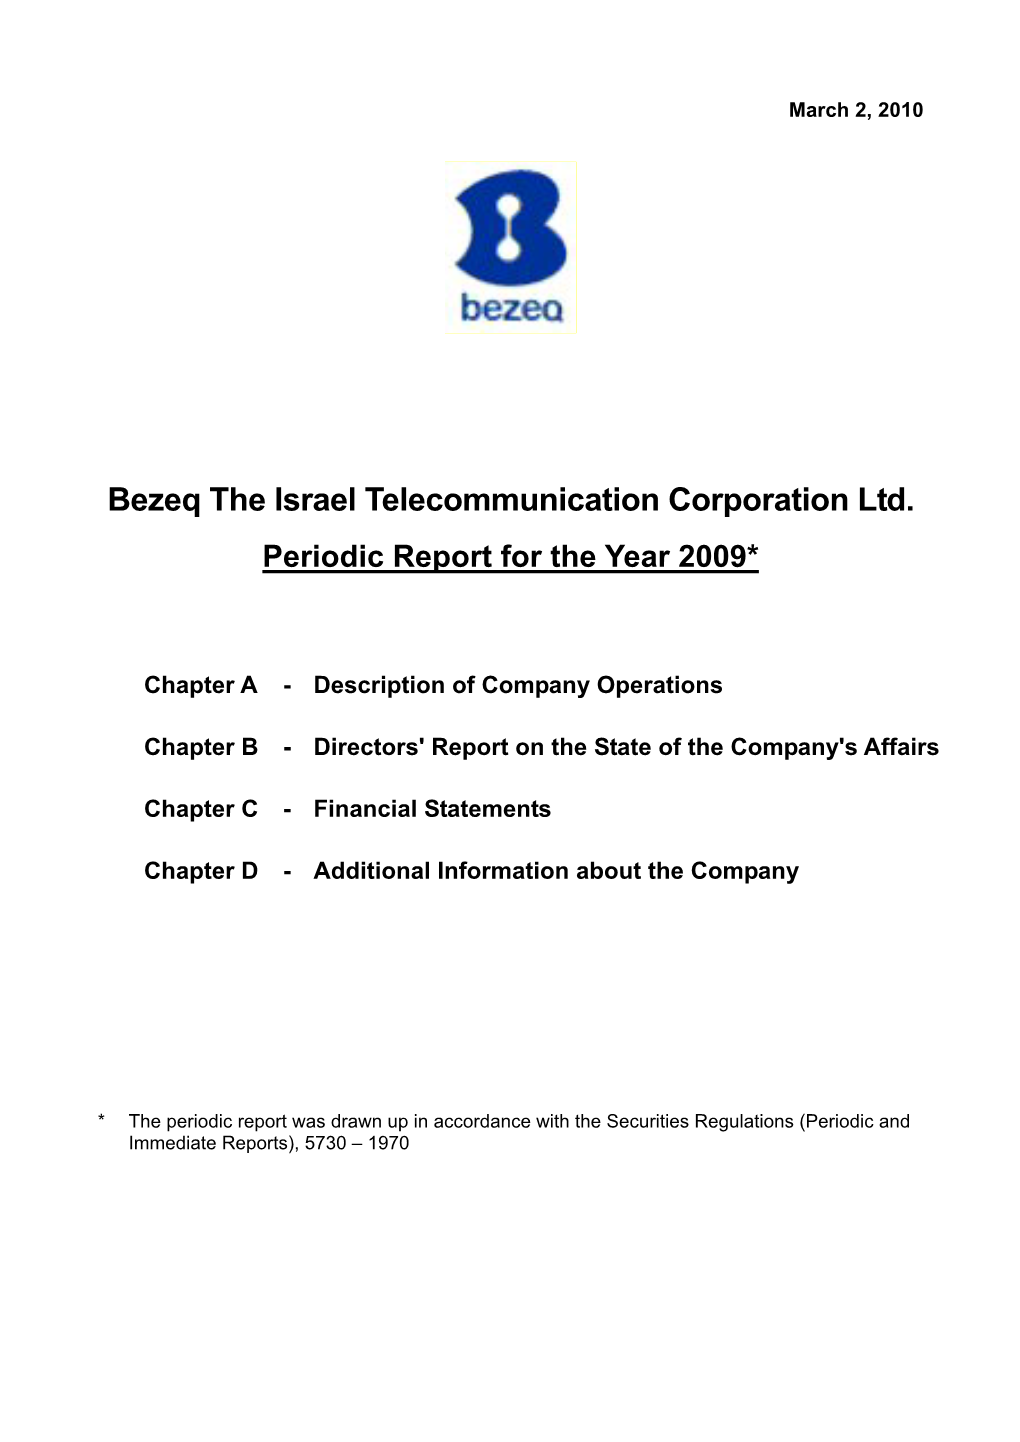 Bezeq the Israel Telecommunication Corporation Ltd. Periodic Report for the Year 2009*